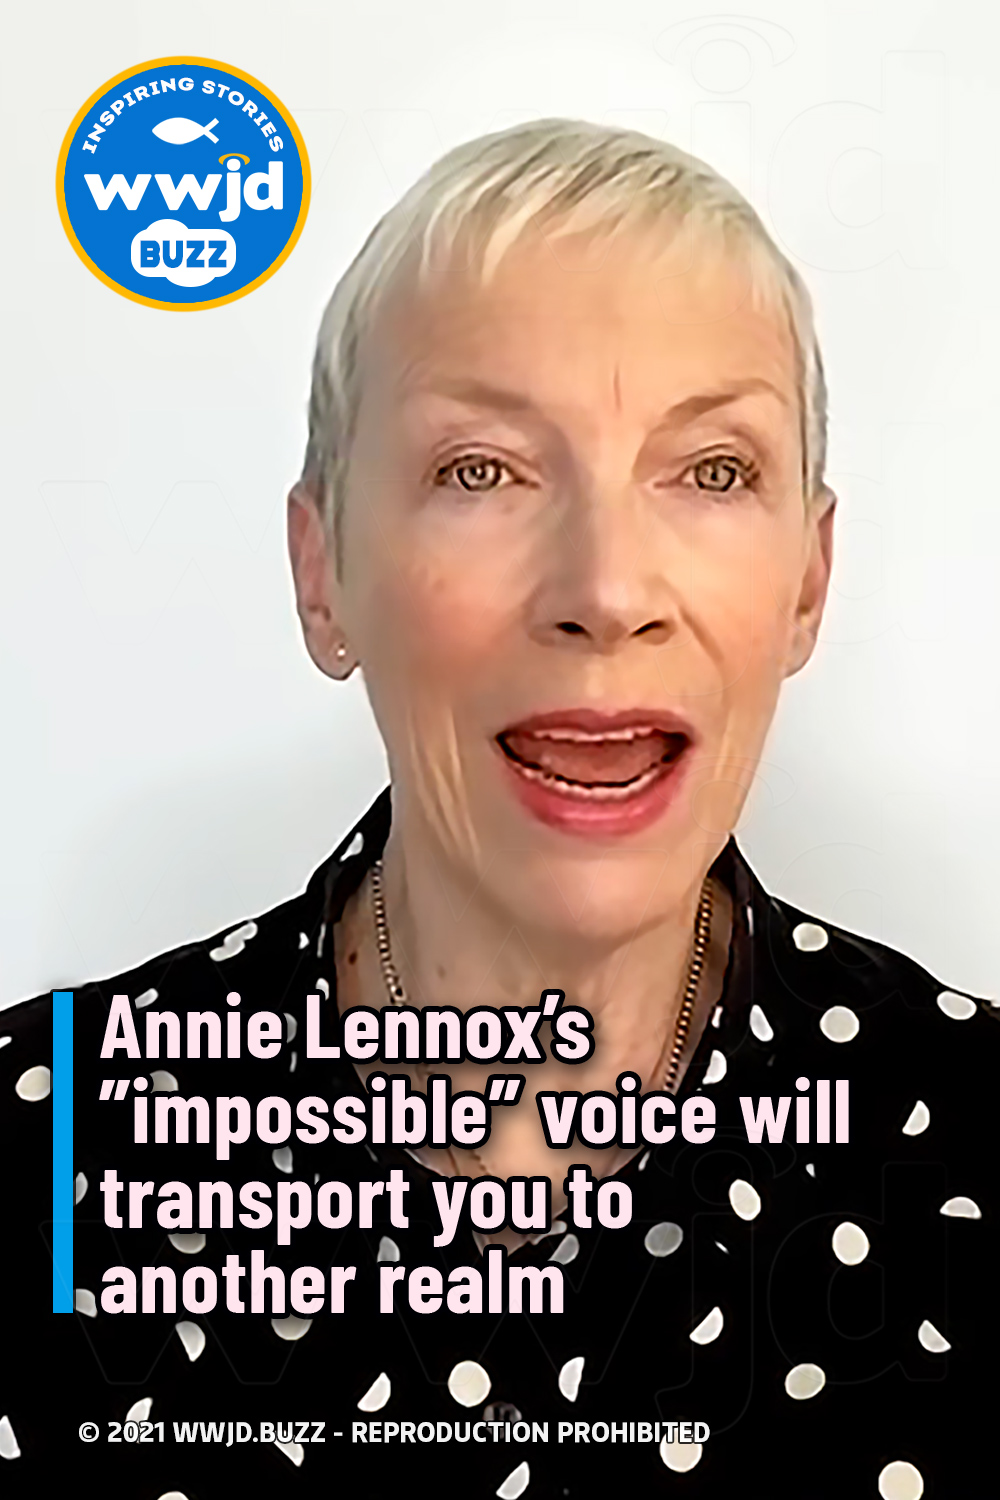 Annie Lennox\'s ”impossible” voice will transport you to another realm